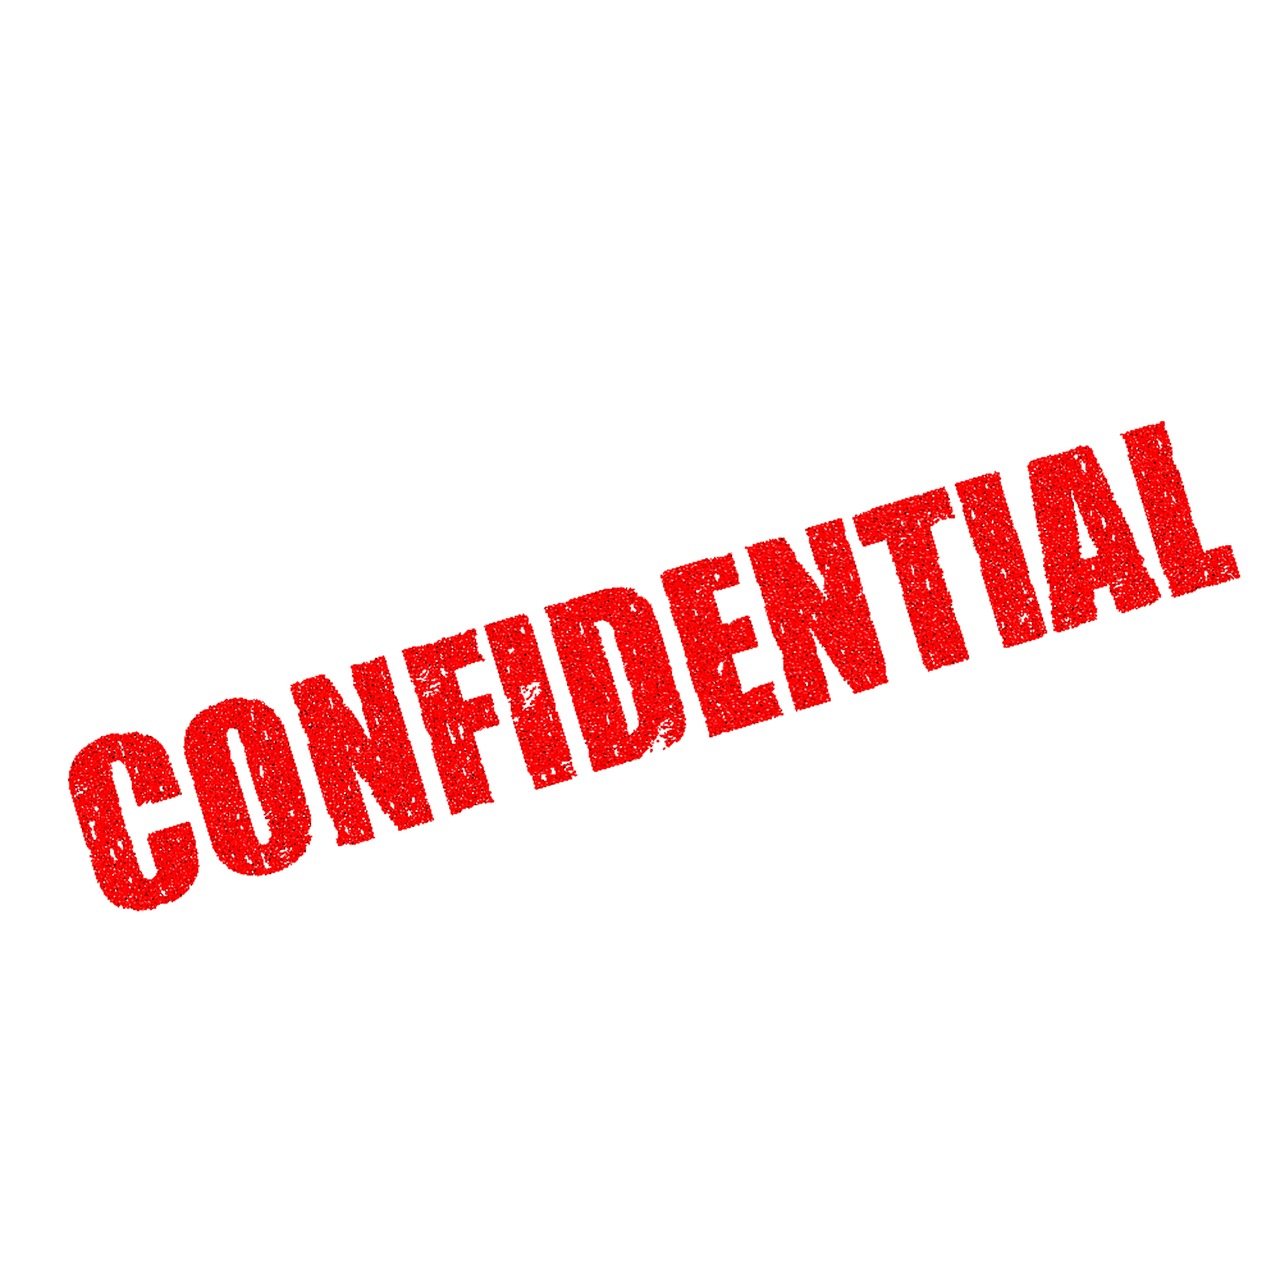 Data Breaches - Ensuring Confidentiality in Office Applications